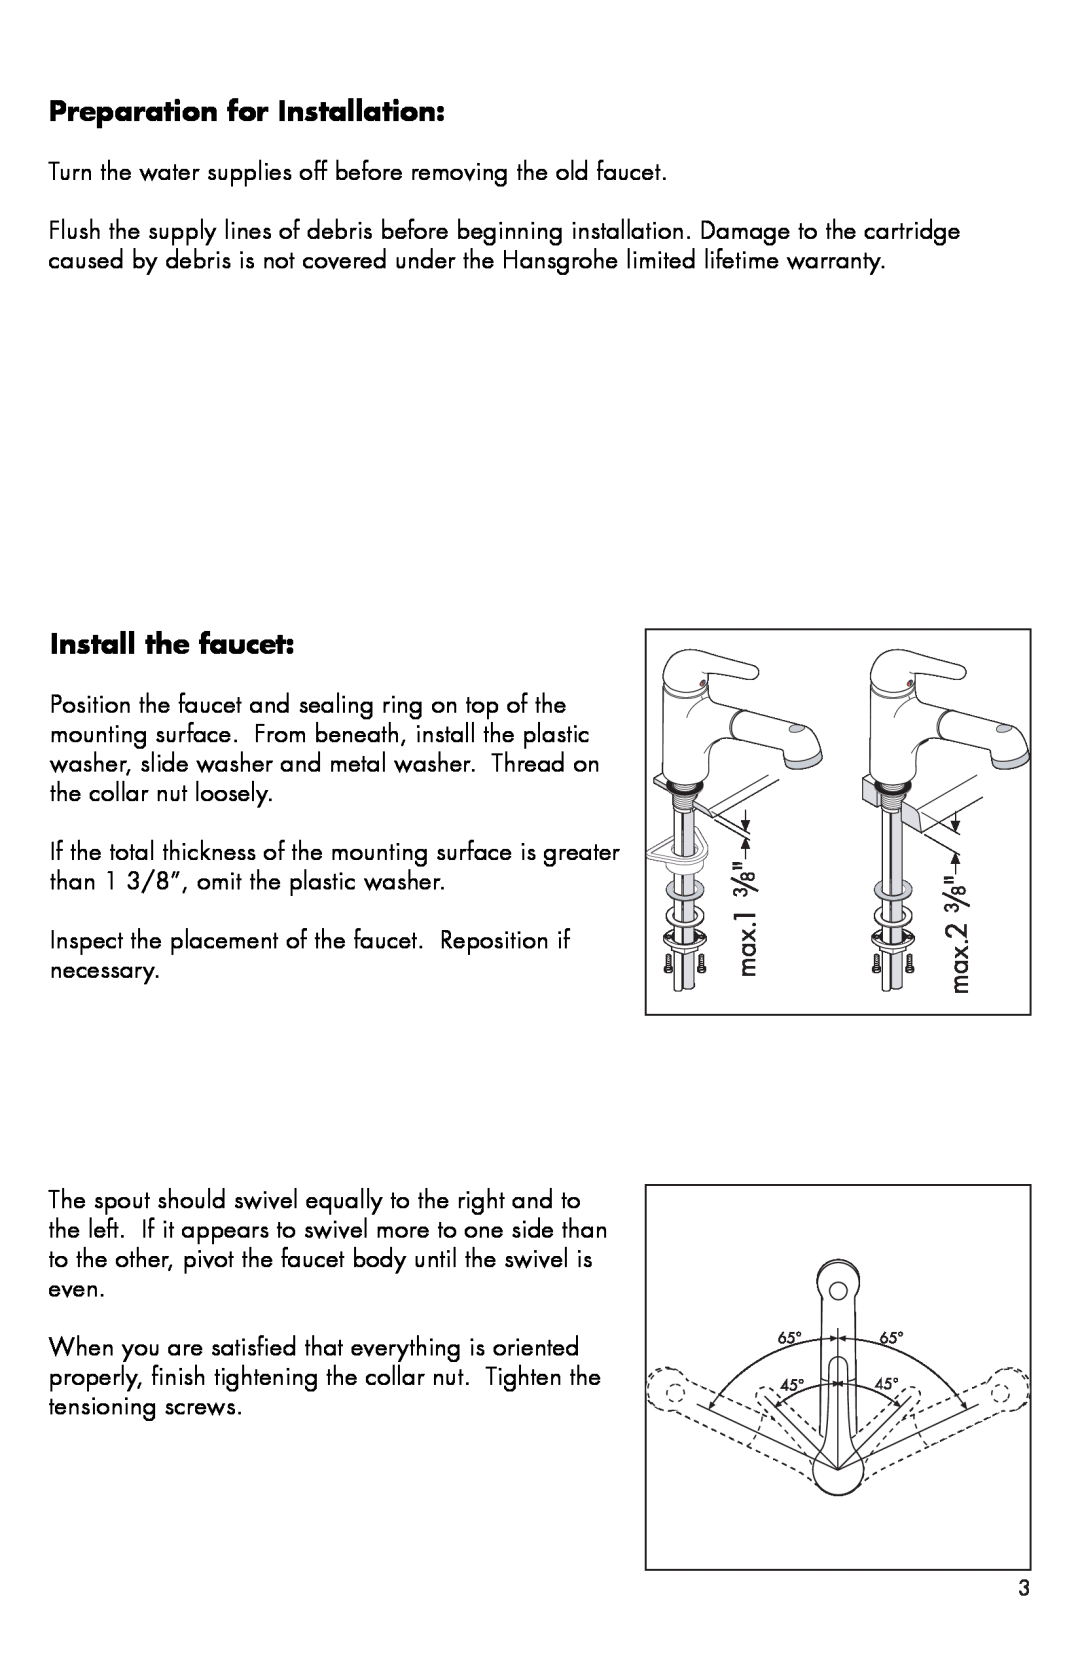 Hans Grohe 35807801 installation instructions Preparation for Installation, Install the faucet 